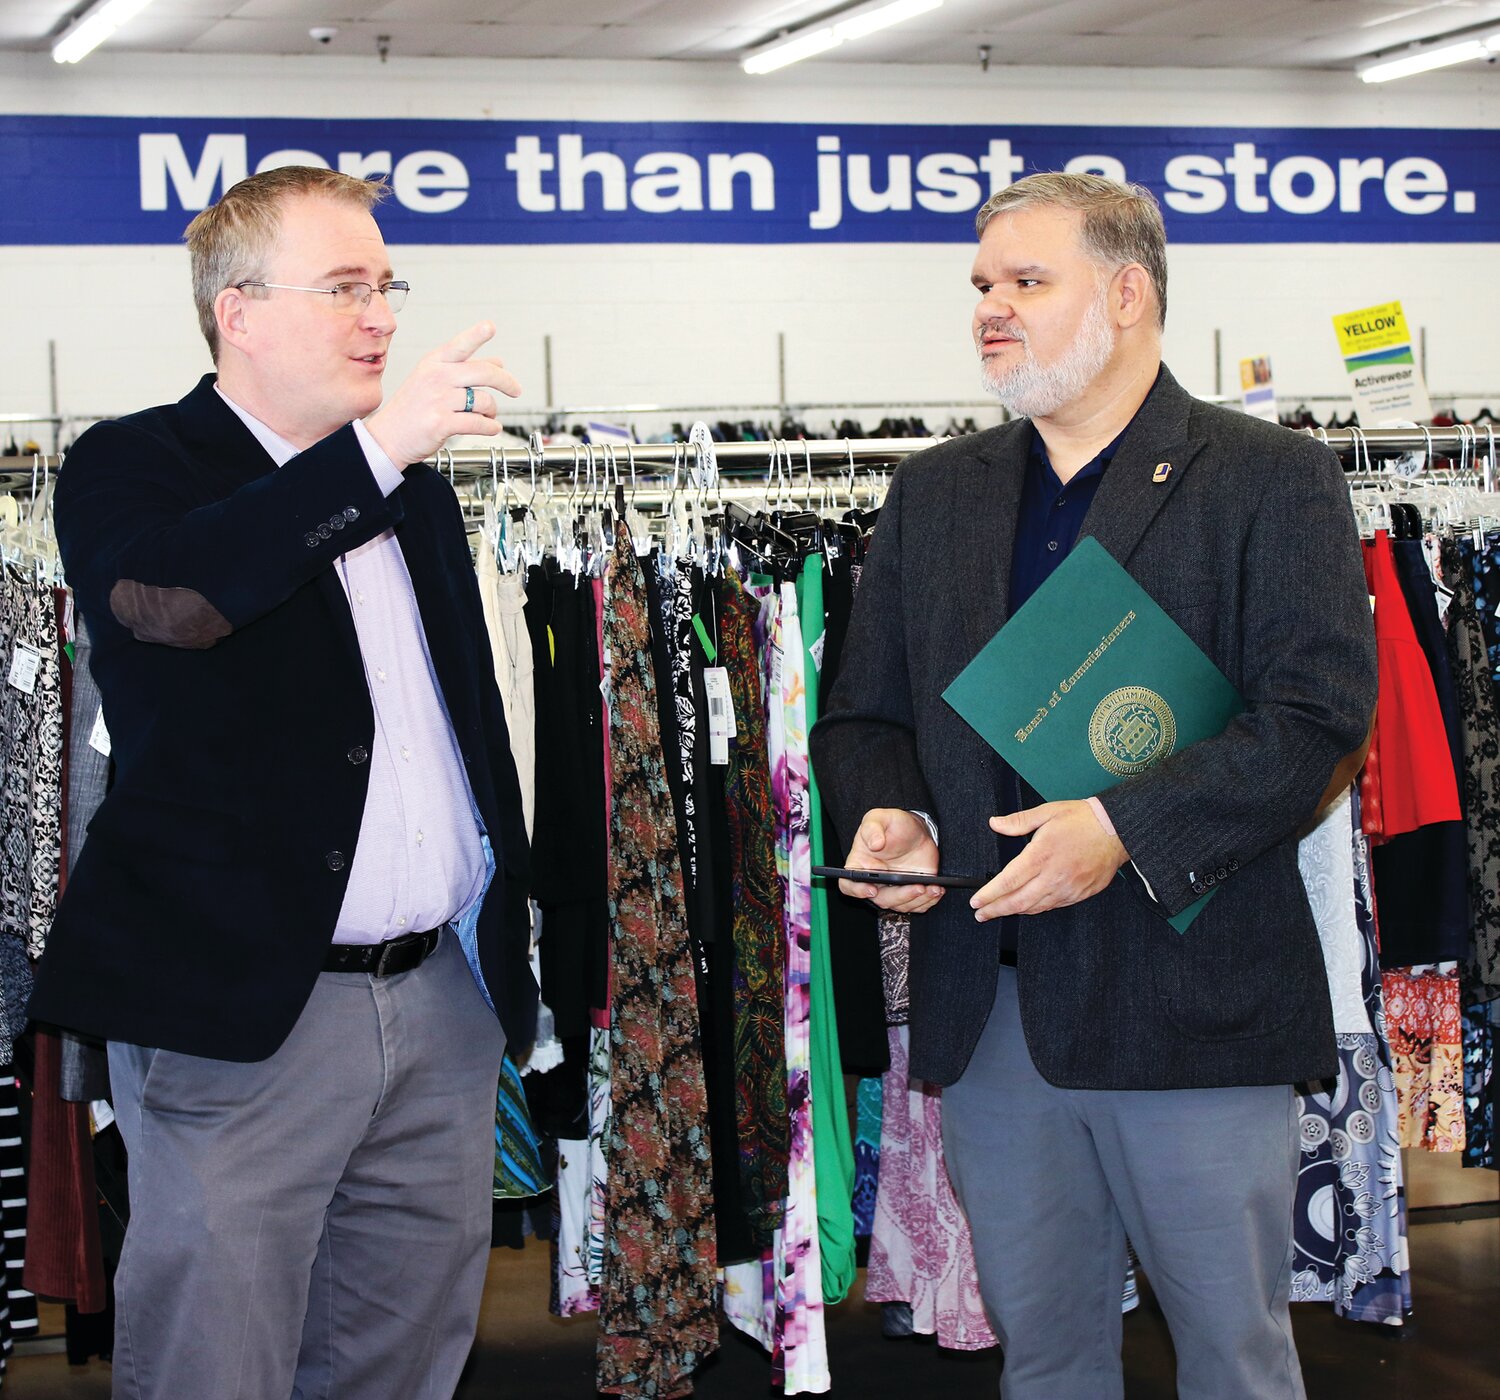 State Rep. Brian Munroe, left, and Goodwill Keystone Area President and CEO Ed Lada talk inside the store.